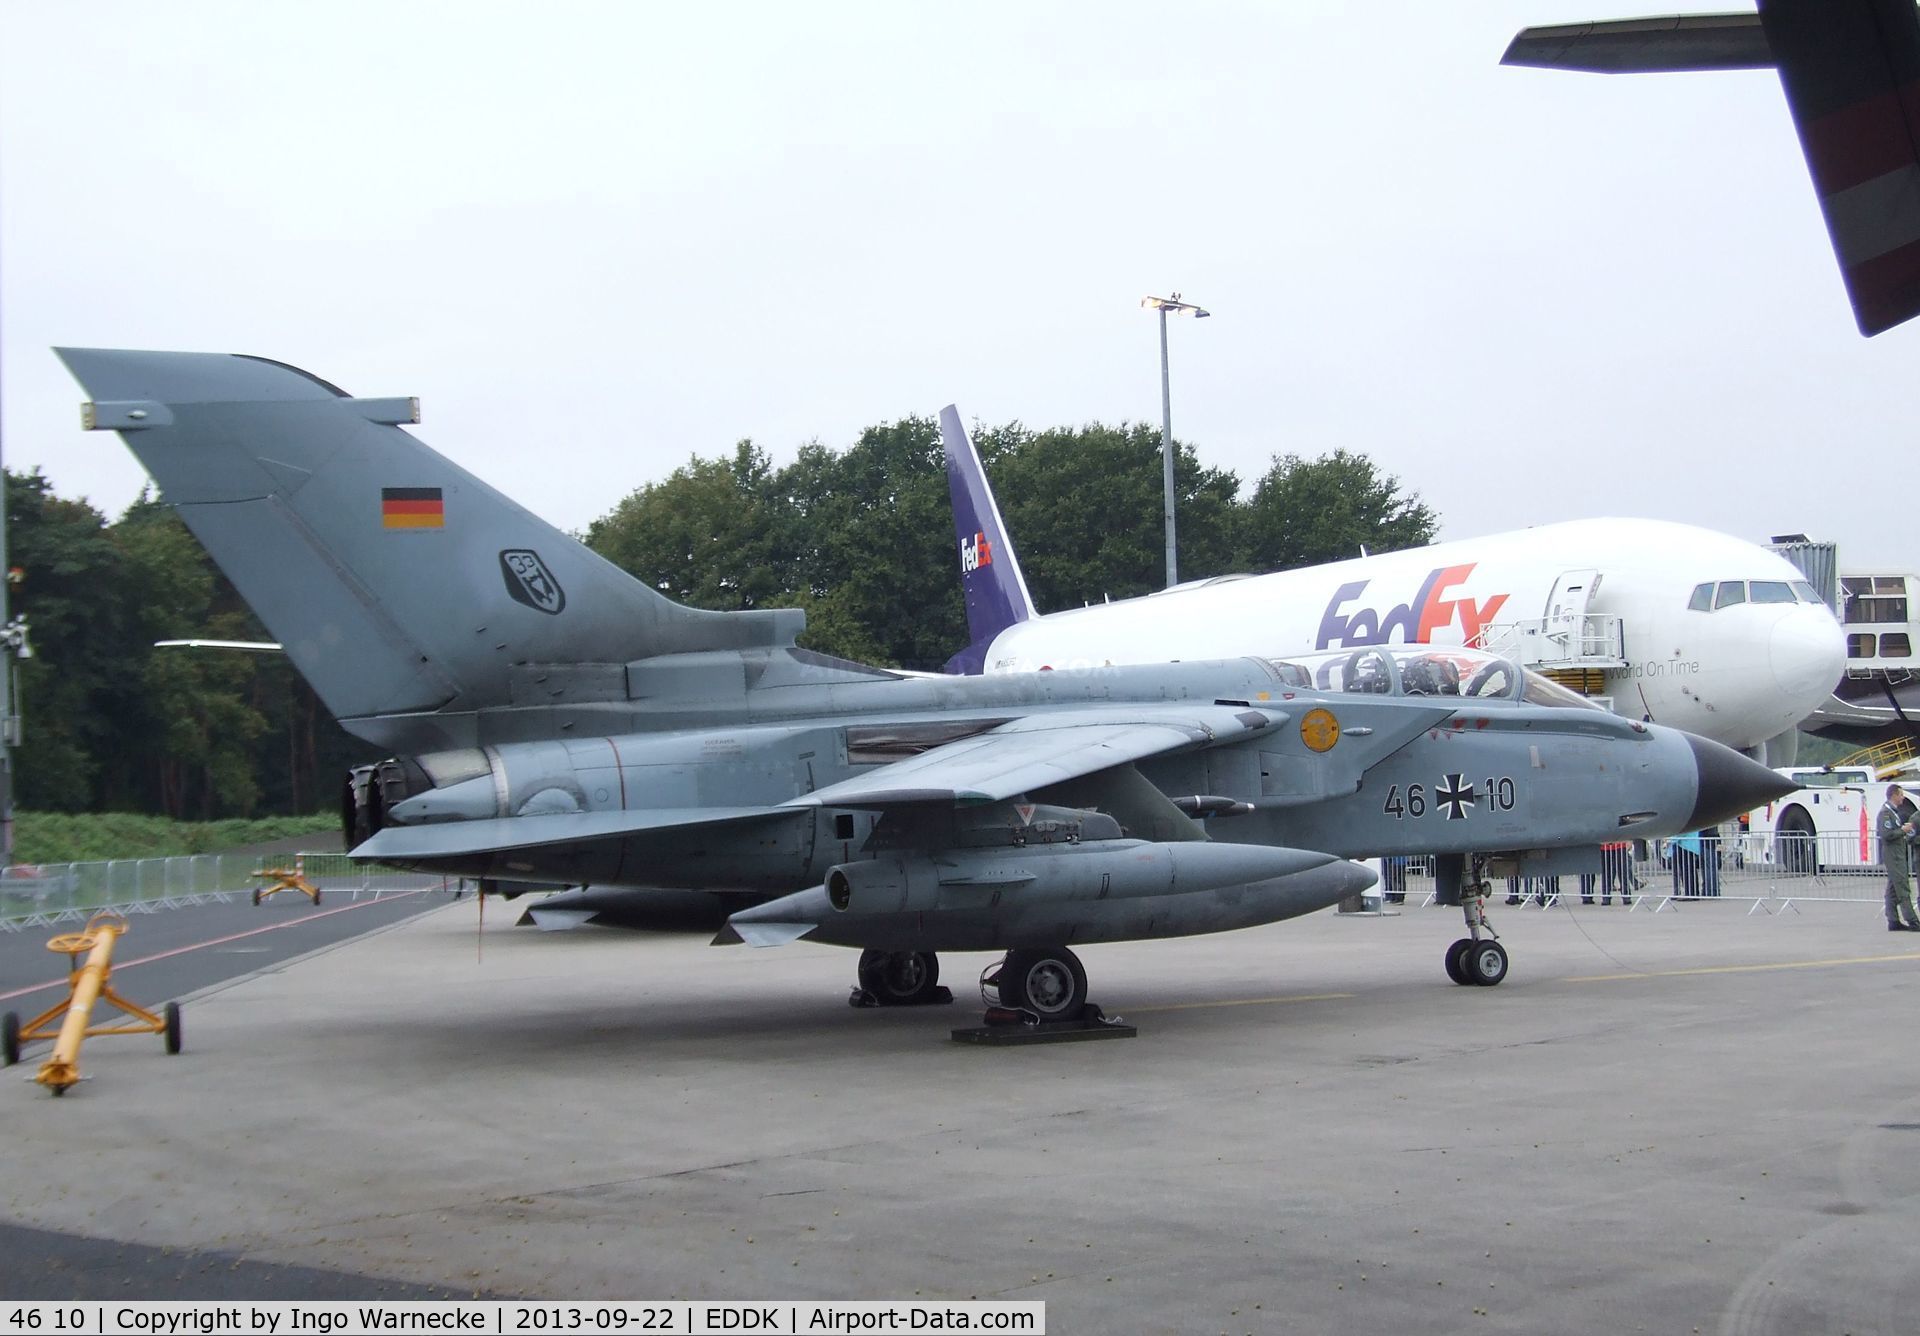 46 10, Panavia Tornado IDS C/N 767/GS243/4310, Panavia Tornado IDS of the German Air Force (Luftwaffe) at the DLR 2013 air and space day on the side of Cologne airport